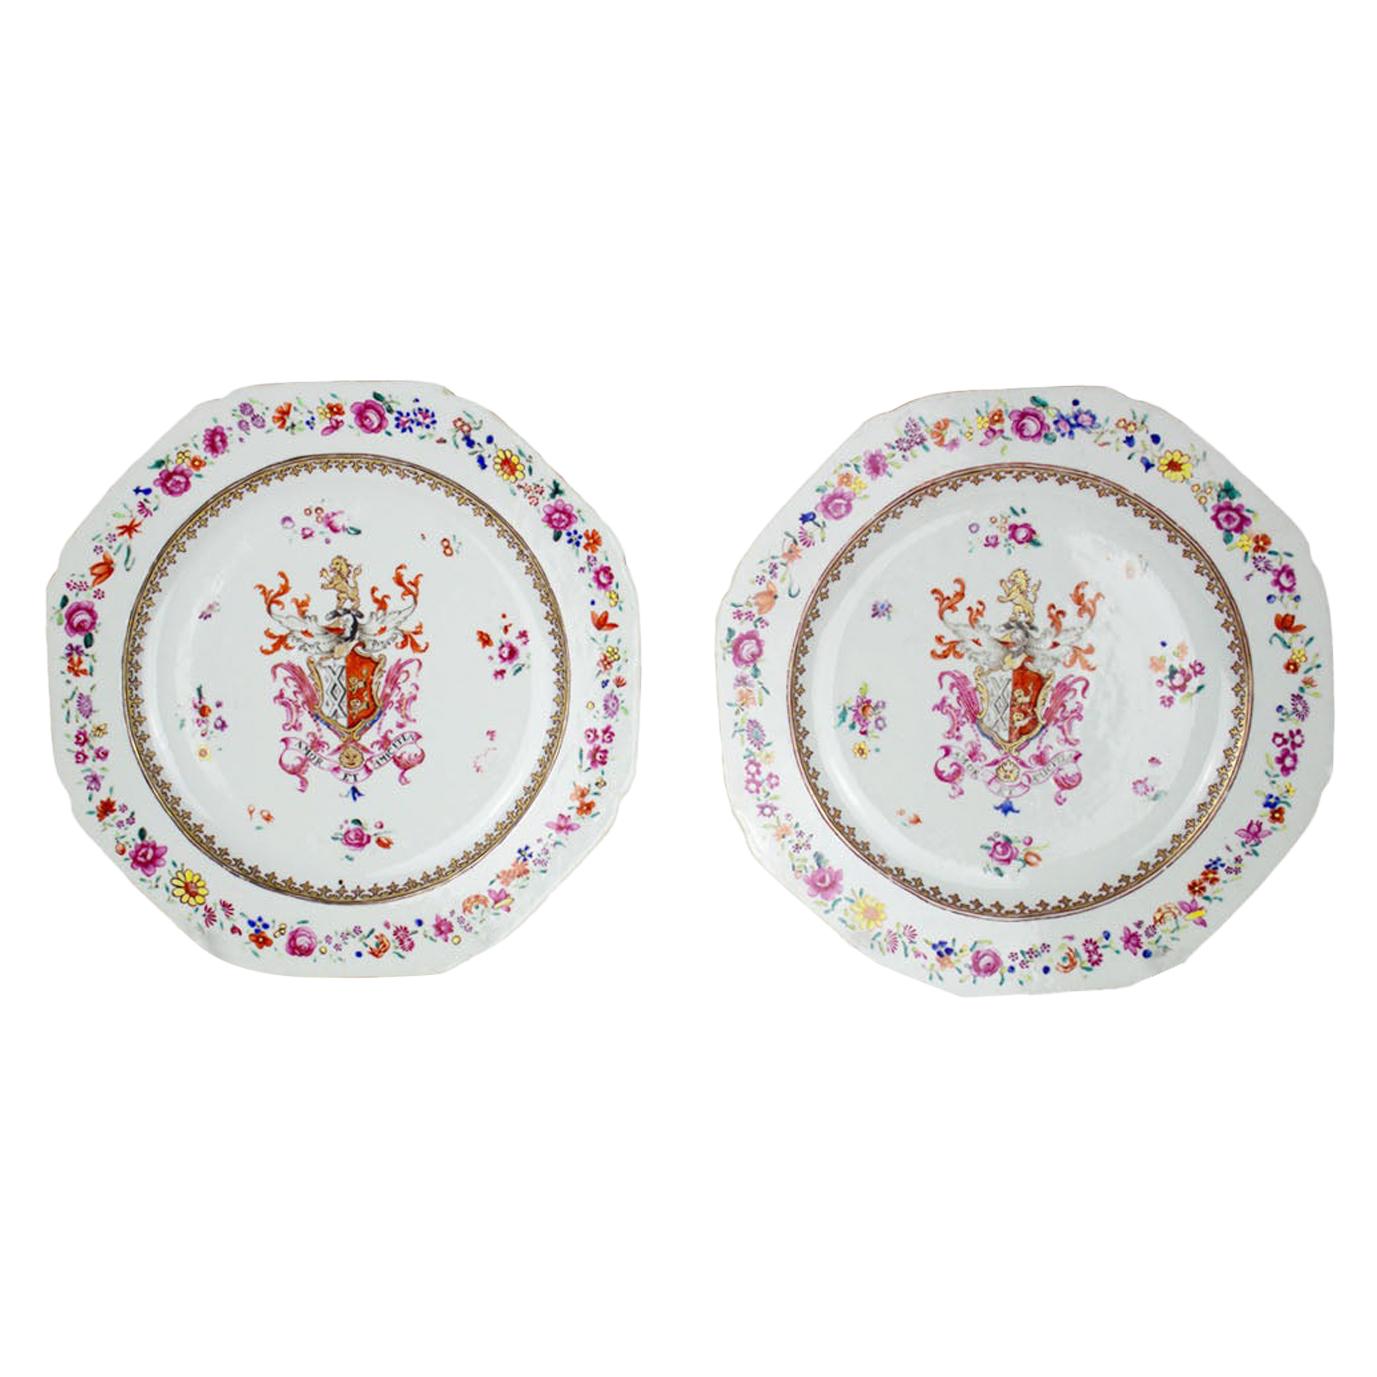 Chinese Export Porcelain Pair of Dishes, Qianlong, 1736-1795 For Sale